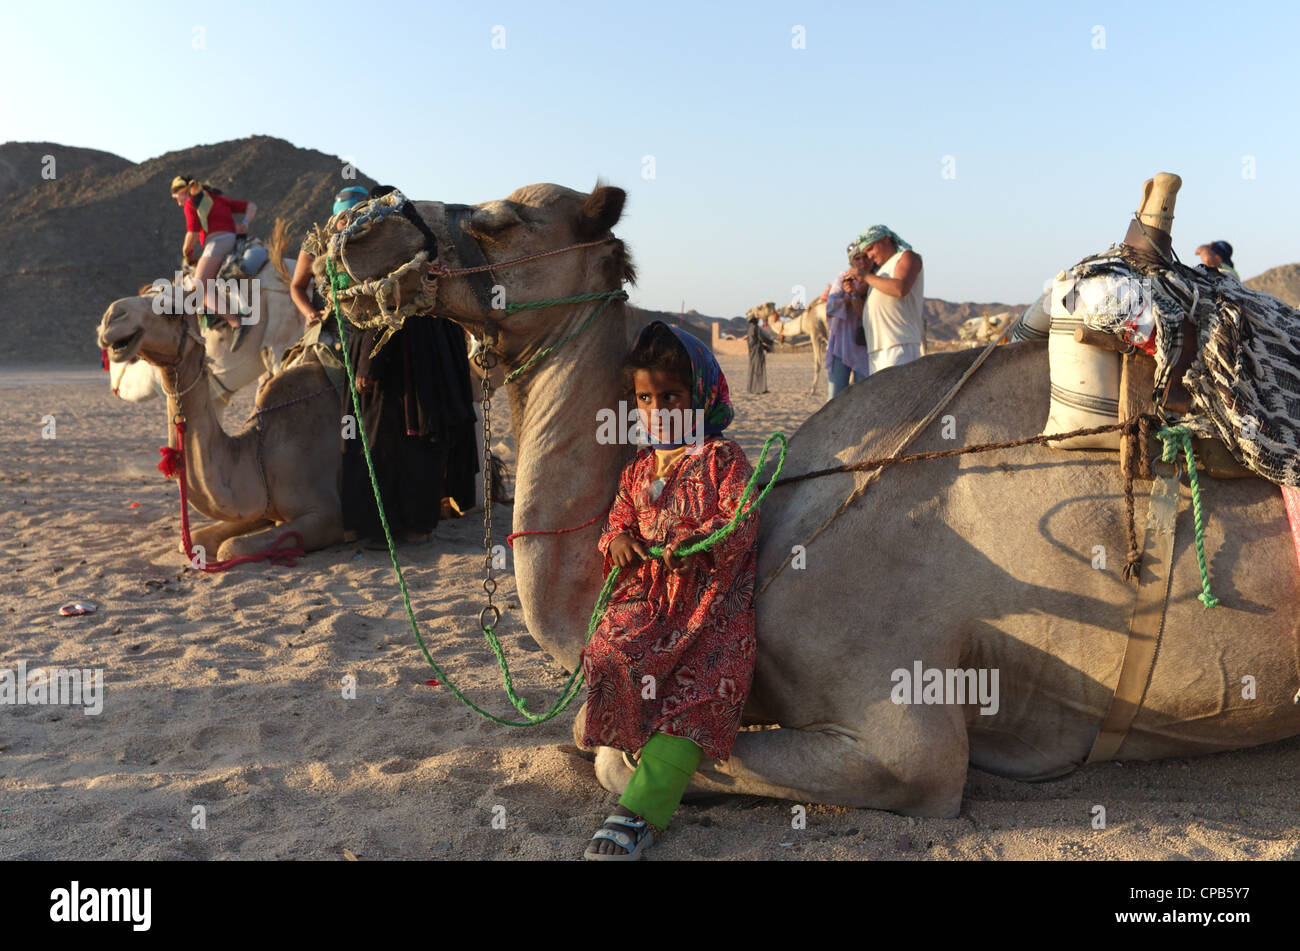 Bedouin girl guide in traditional clothing leads tourists riding camels in desert. Bedouin village about Hurghada, Egypt, Africa Stock Photo